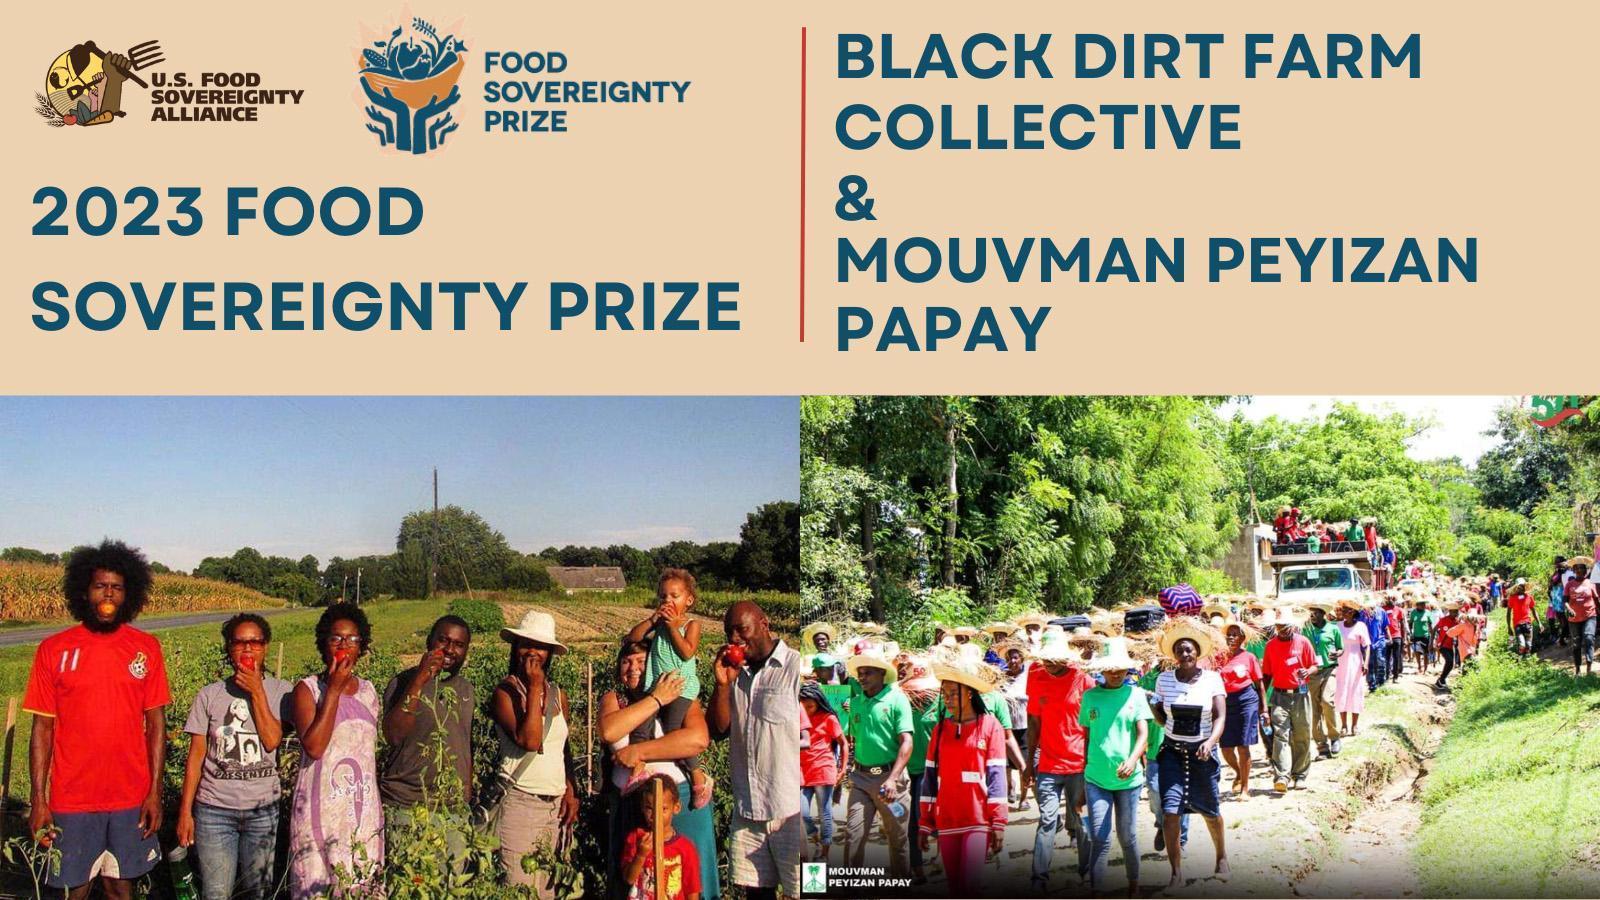 15th Annual Food Sovereignty Prize Honors the Black Dirt Farm Collective and Haiti’s Mouvman Peyizan Papay (MPP)